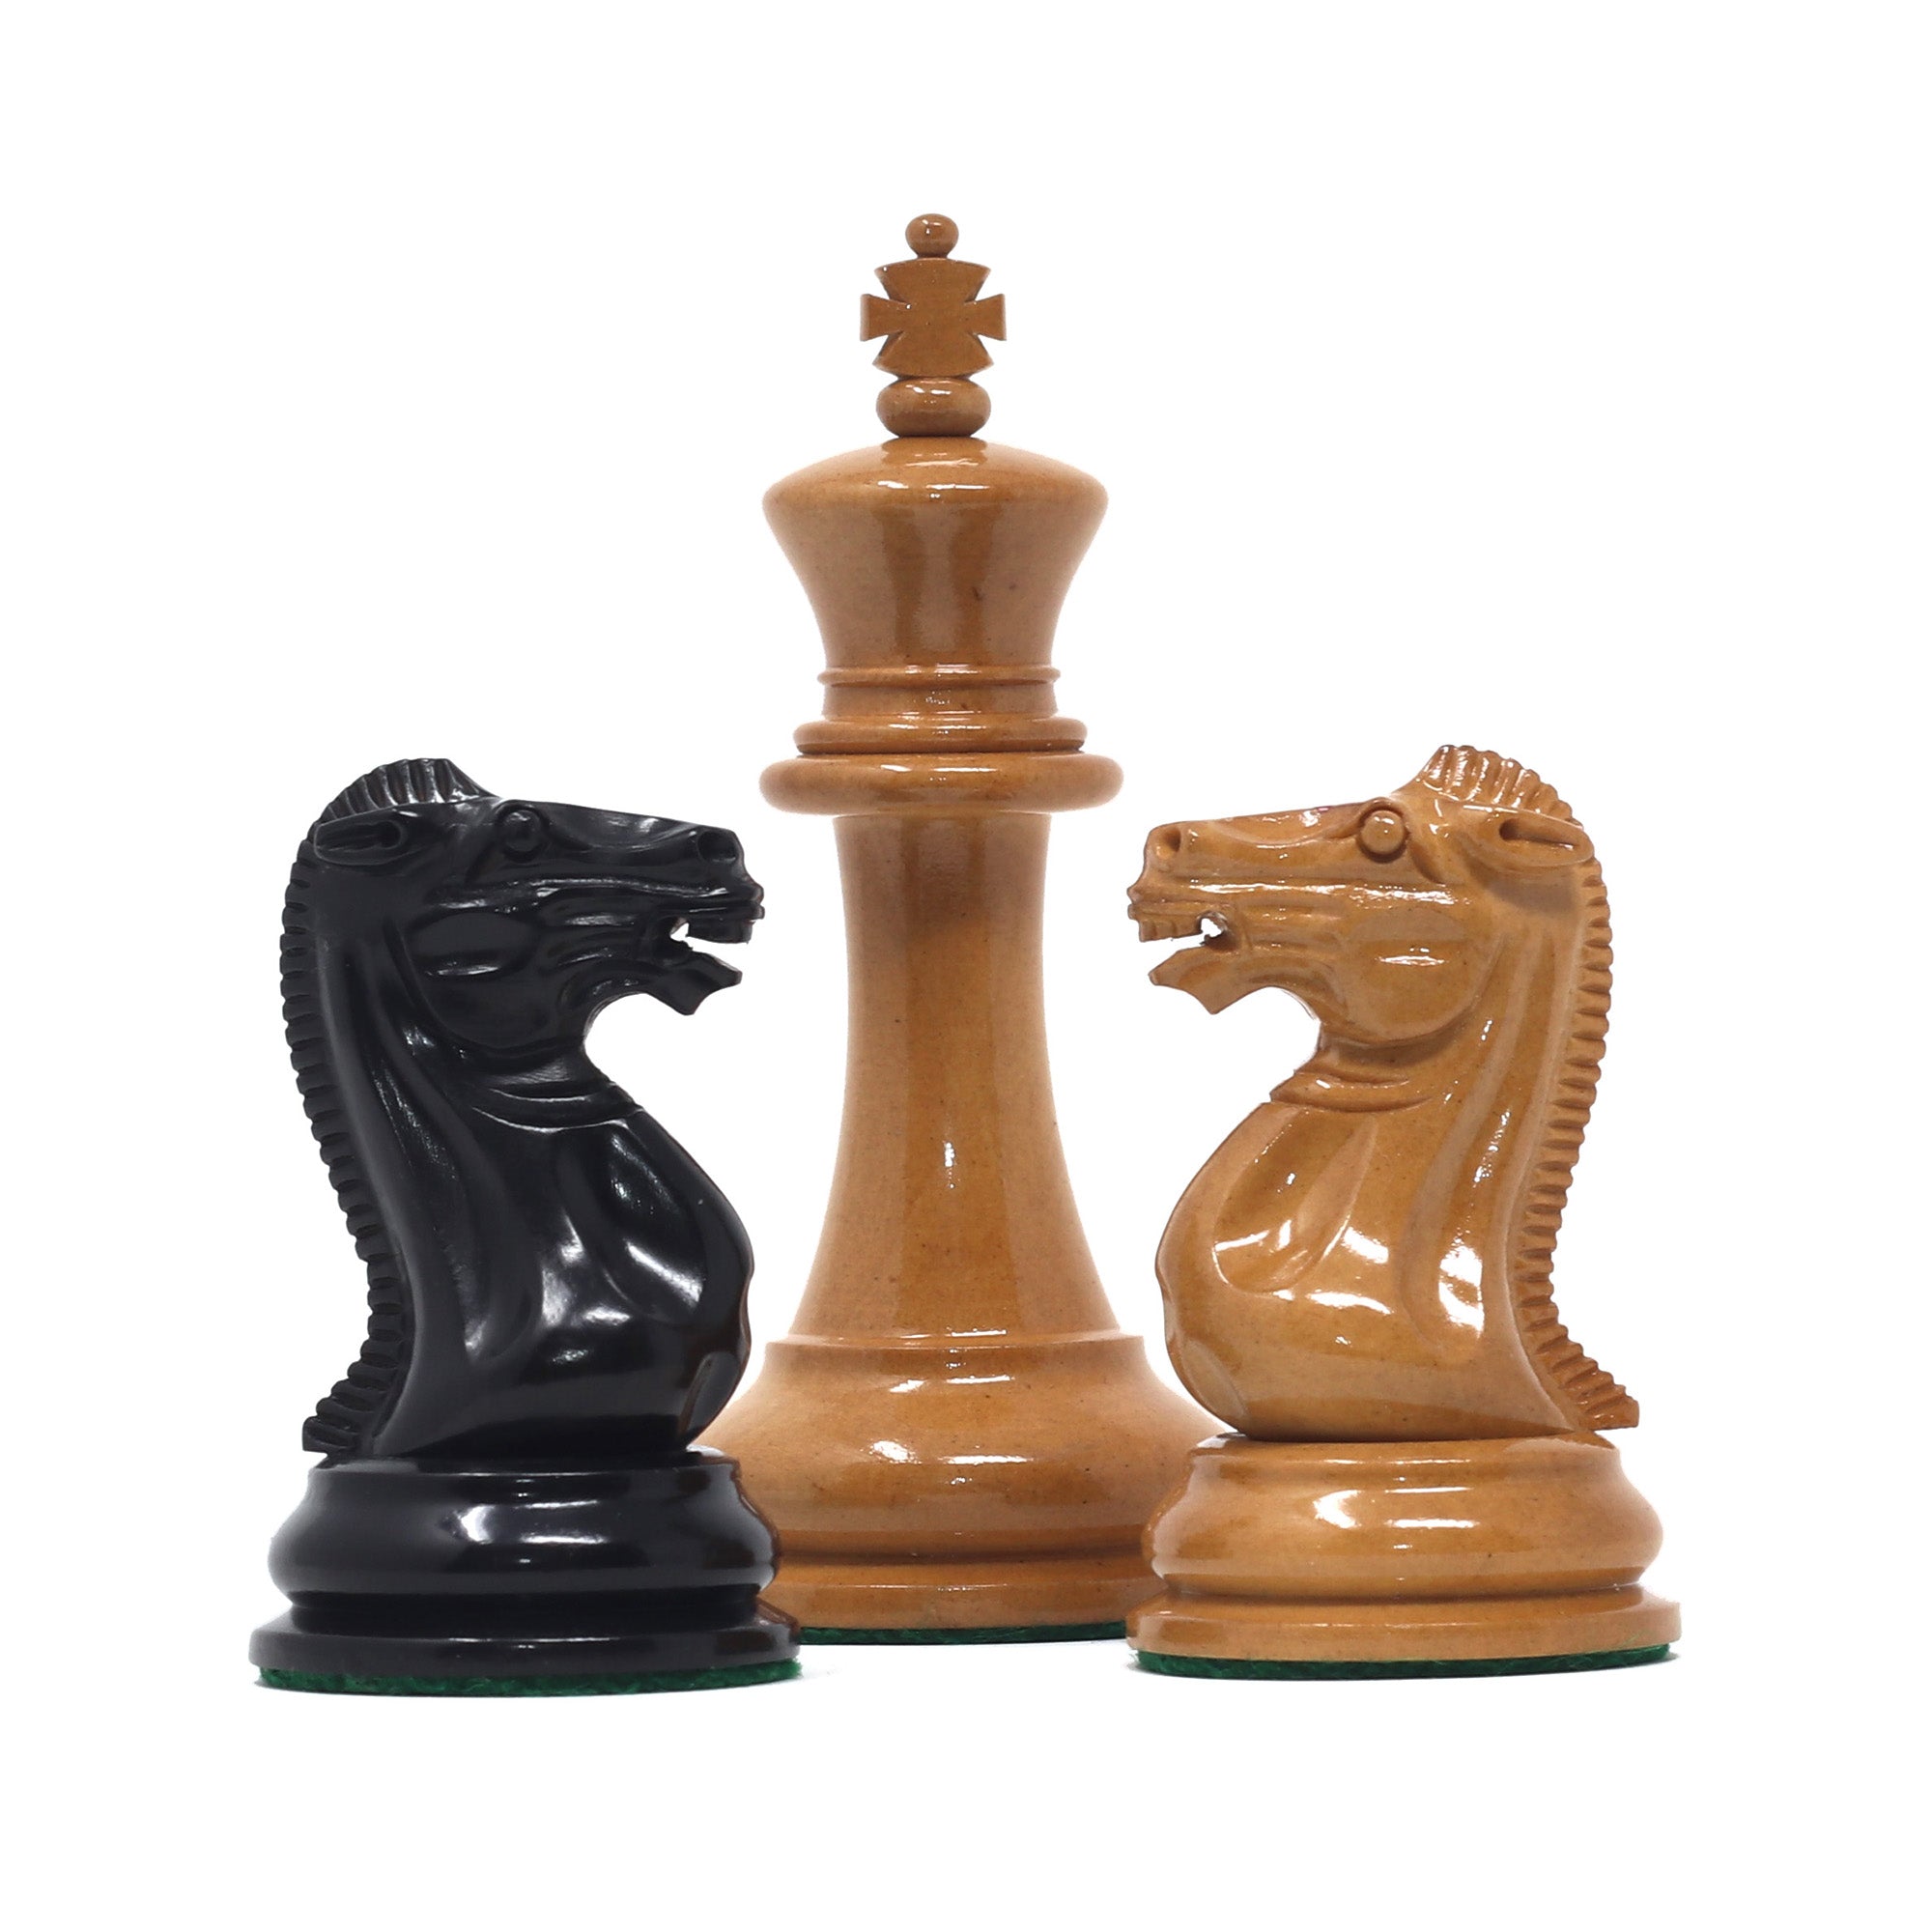 Original Reproduction Nathaniel 1849 Vintage 3.75" Chess Pieces in Antiqued Boxwood & Ebony